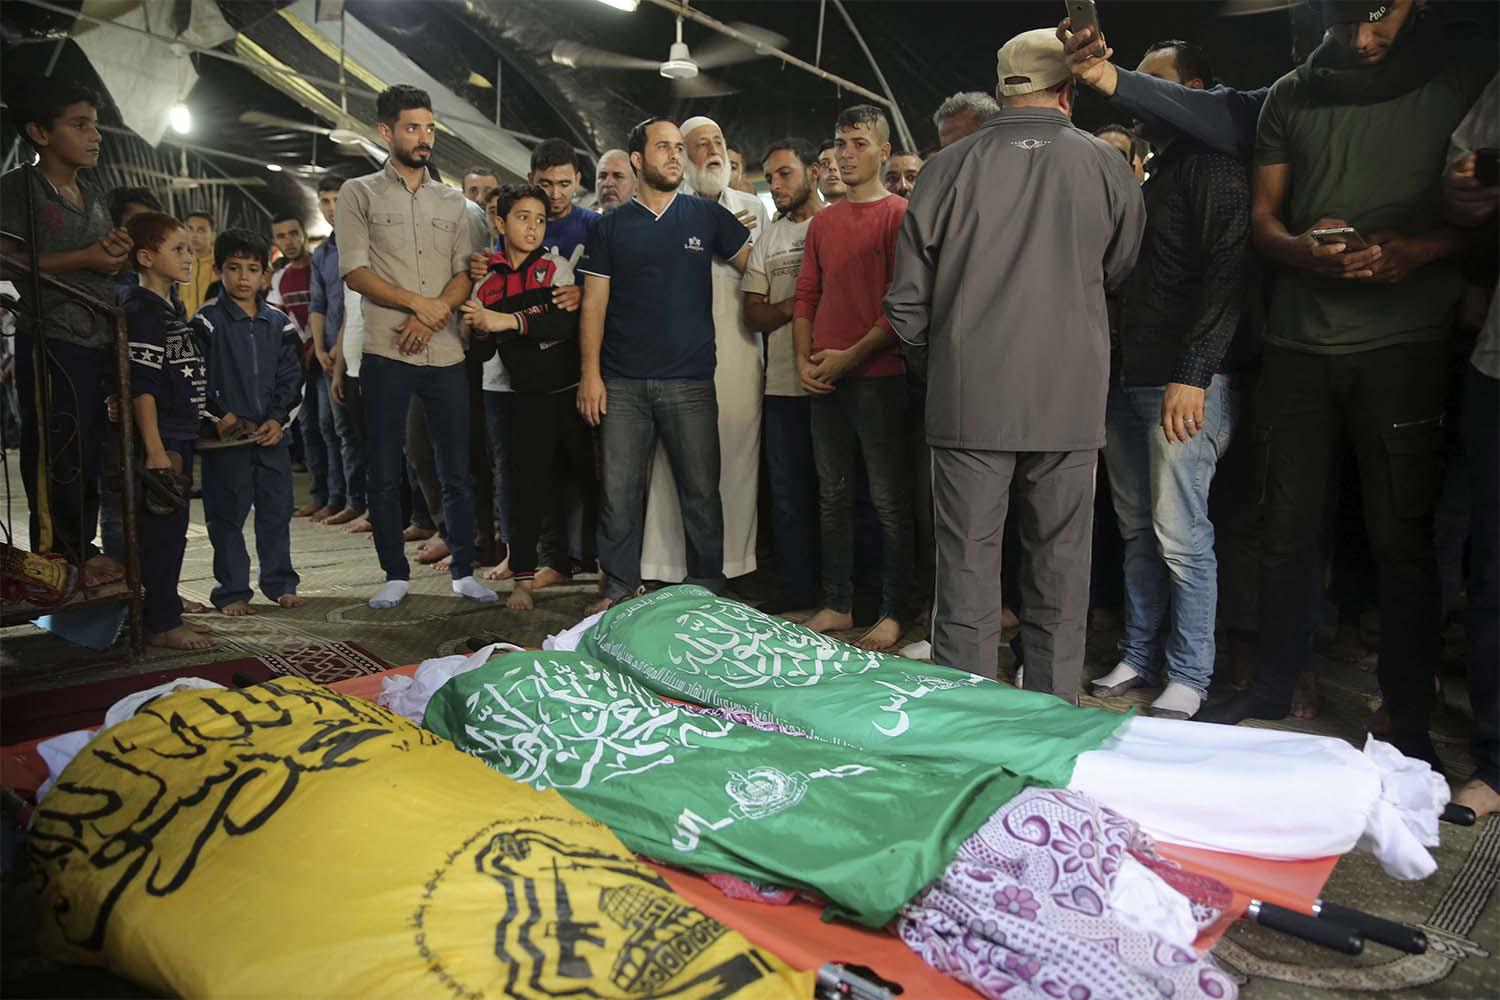 Mourners prepare for prayers over the bodies of Rafat Ayyad and his two sons, who were killed in an Israeli airstrike in Gaza City